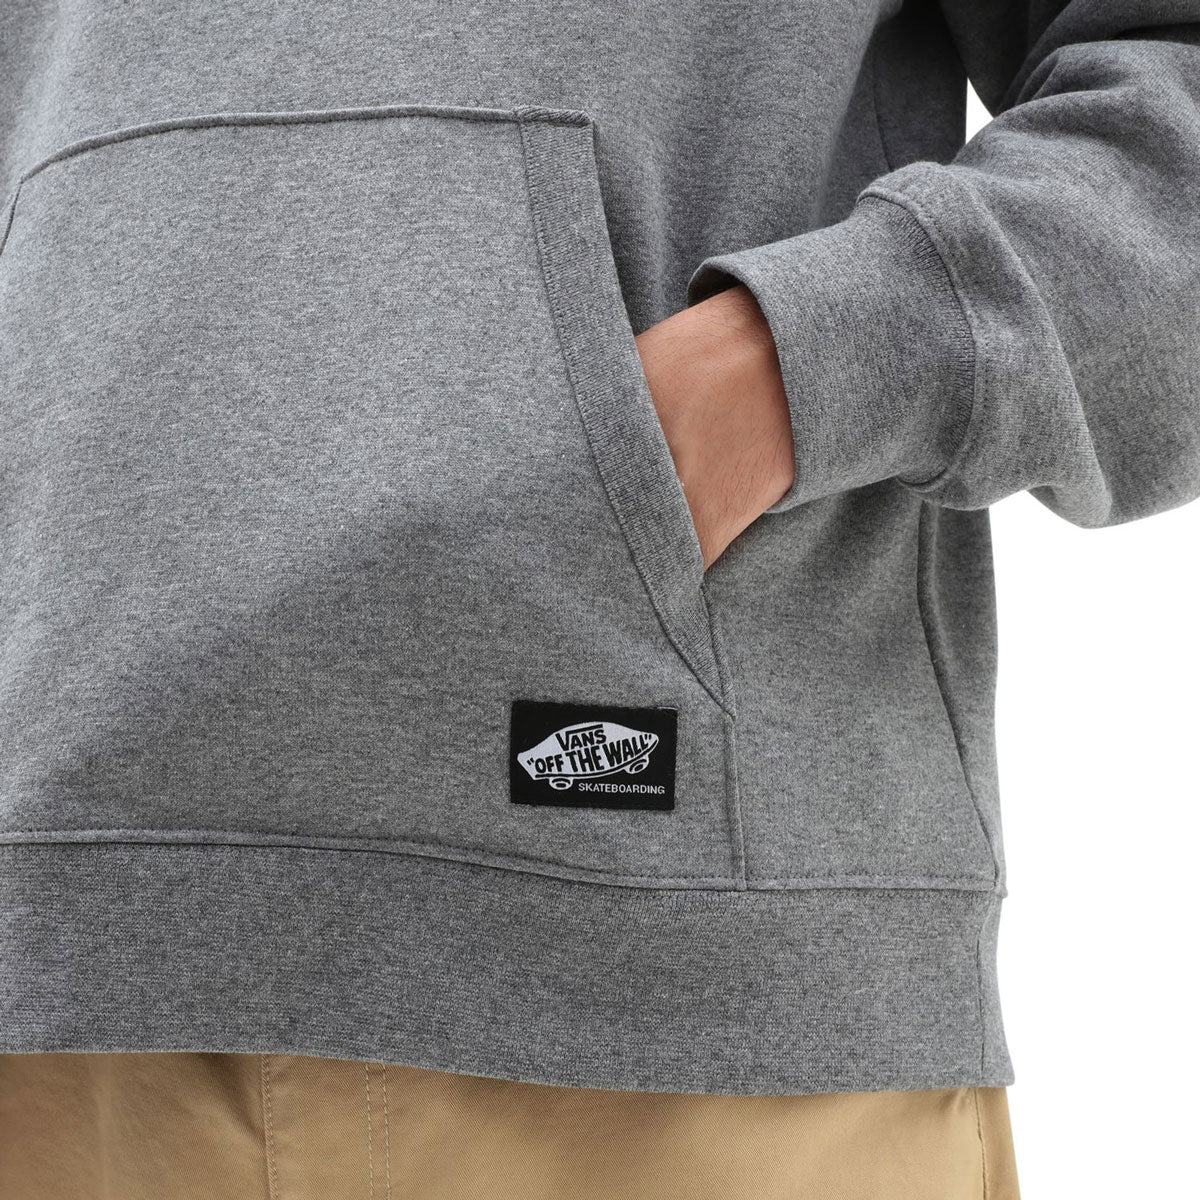 Vans Skate Classics Patch Hoodie - Cement Heather image 4